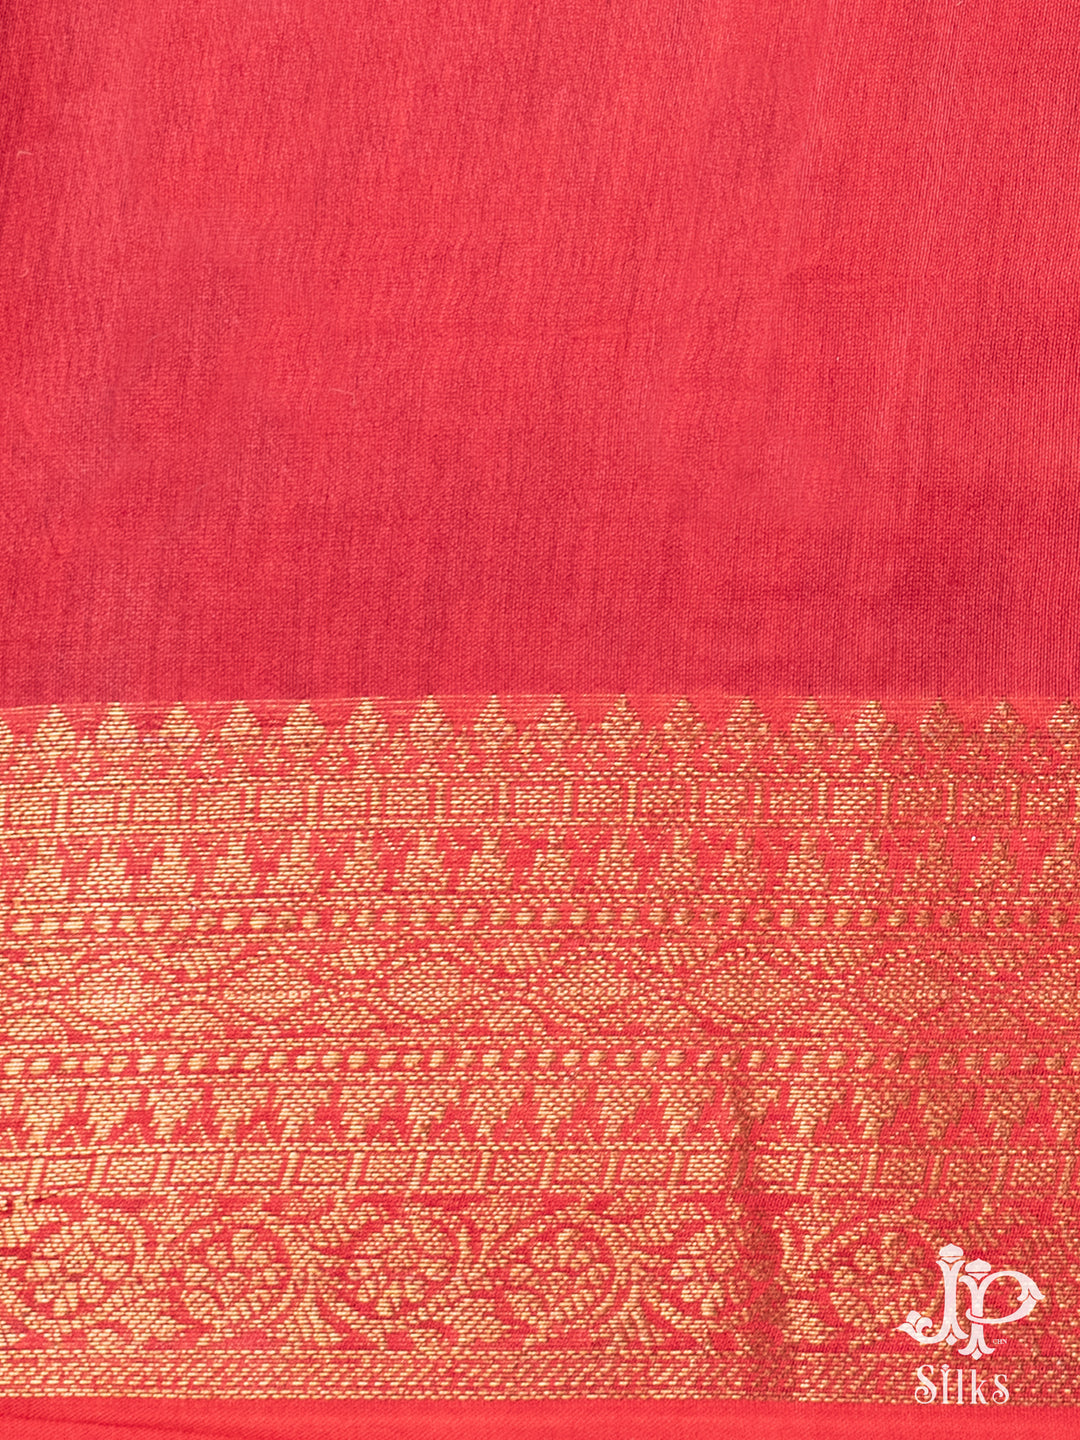 Black and Red Chanderi Fancy Saree - E1582 - View 2